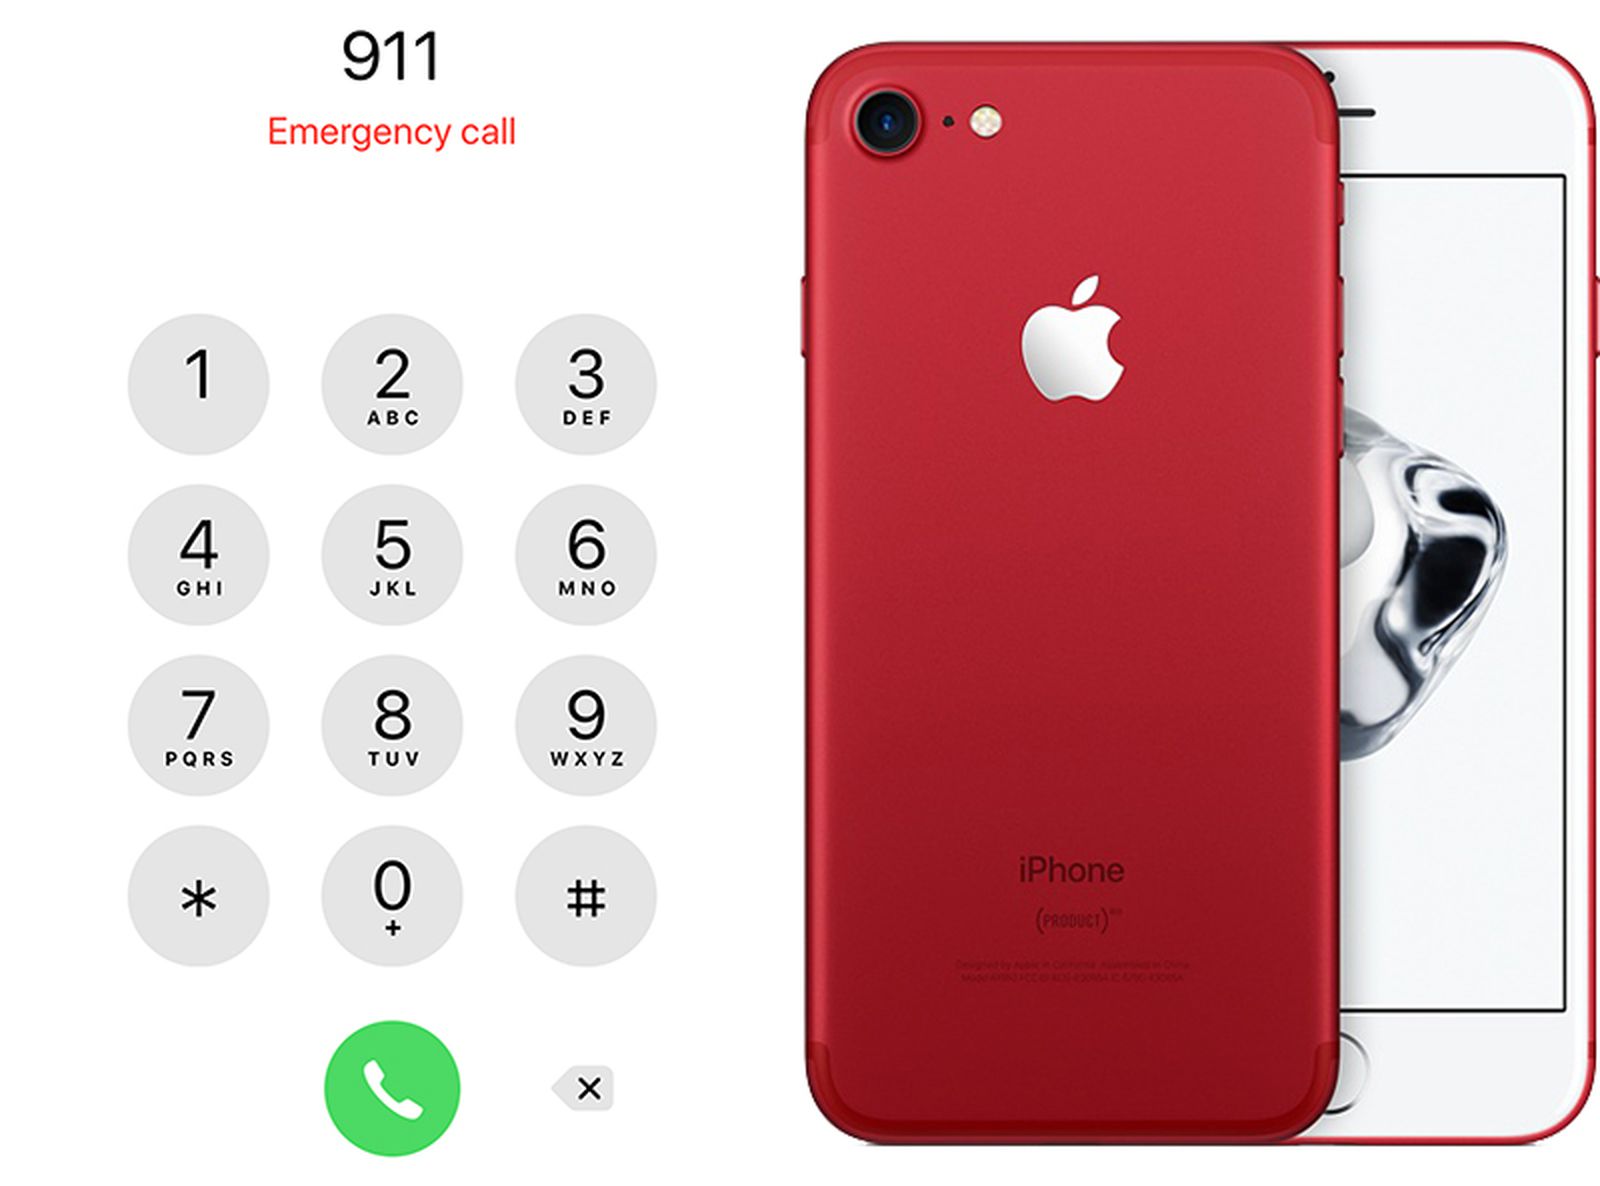 with-ios-12-your-iphone-will-automatically-share-location-info-during-911-emergency-calls